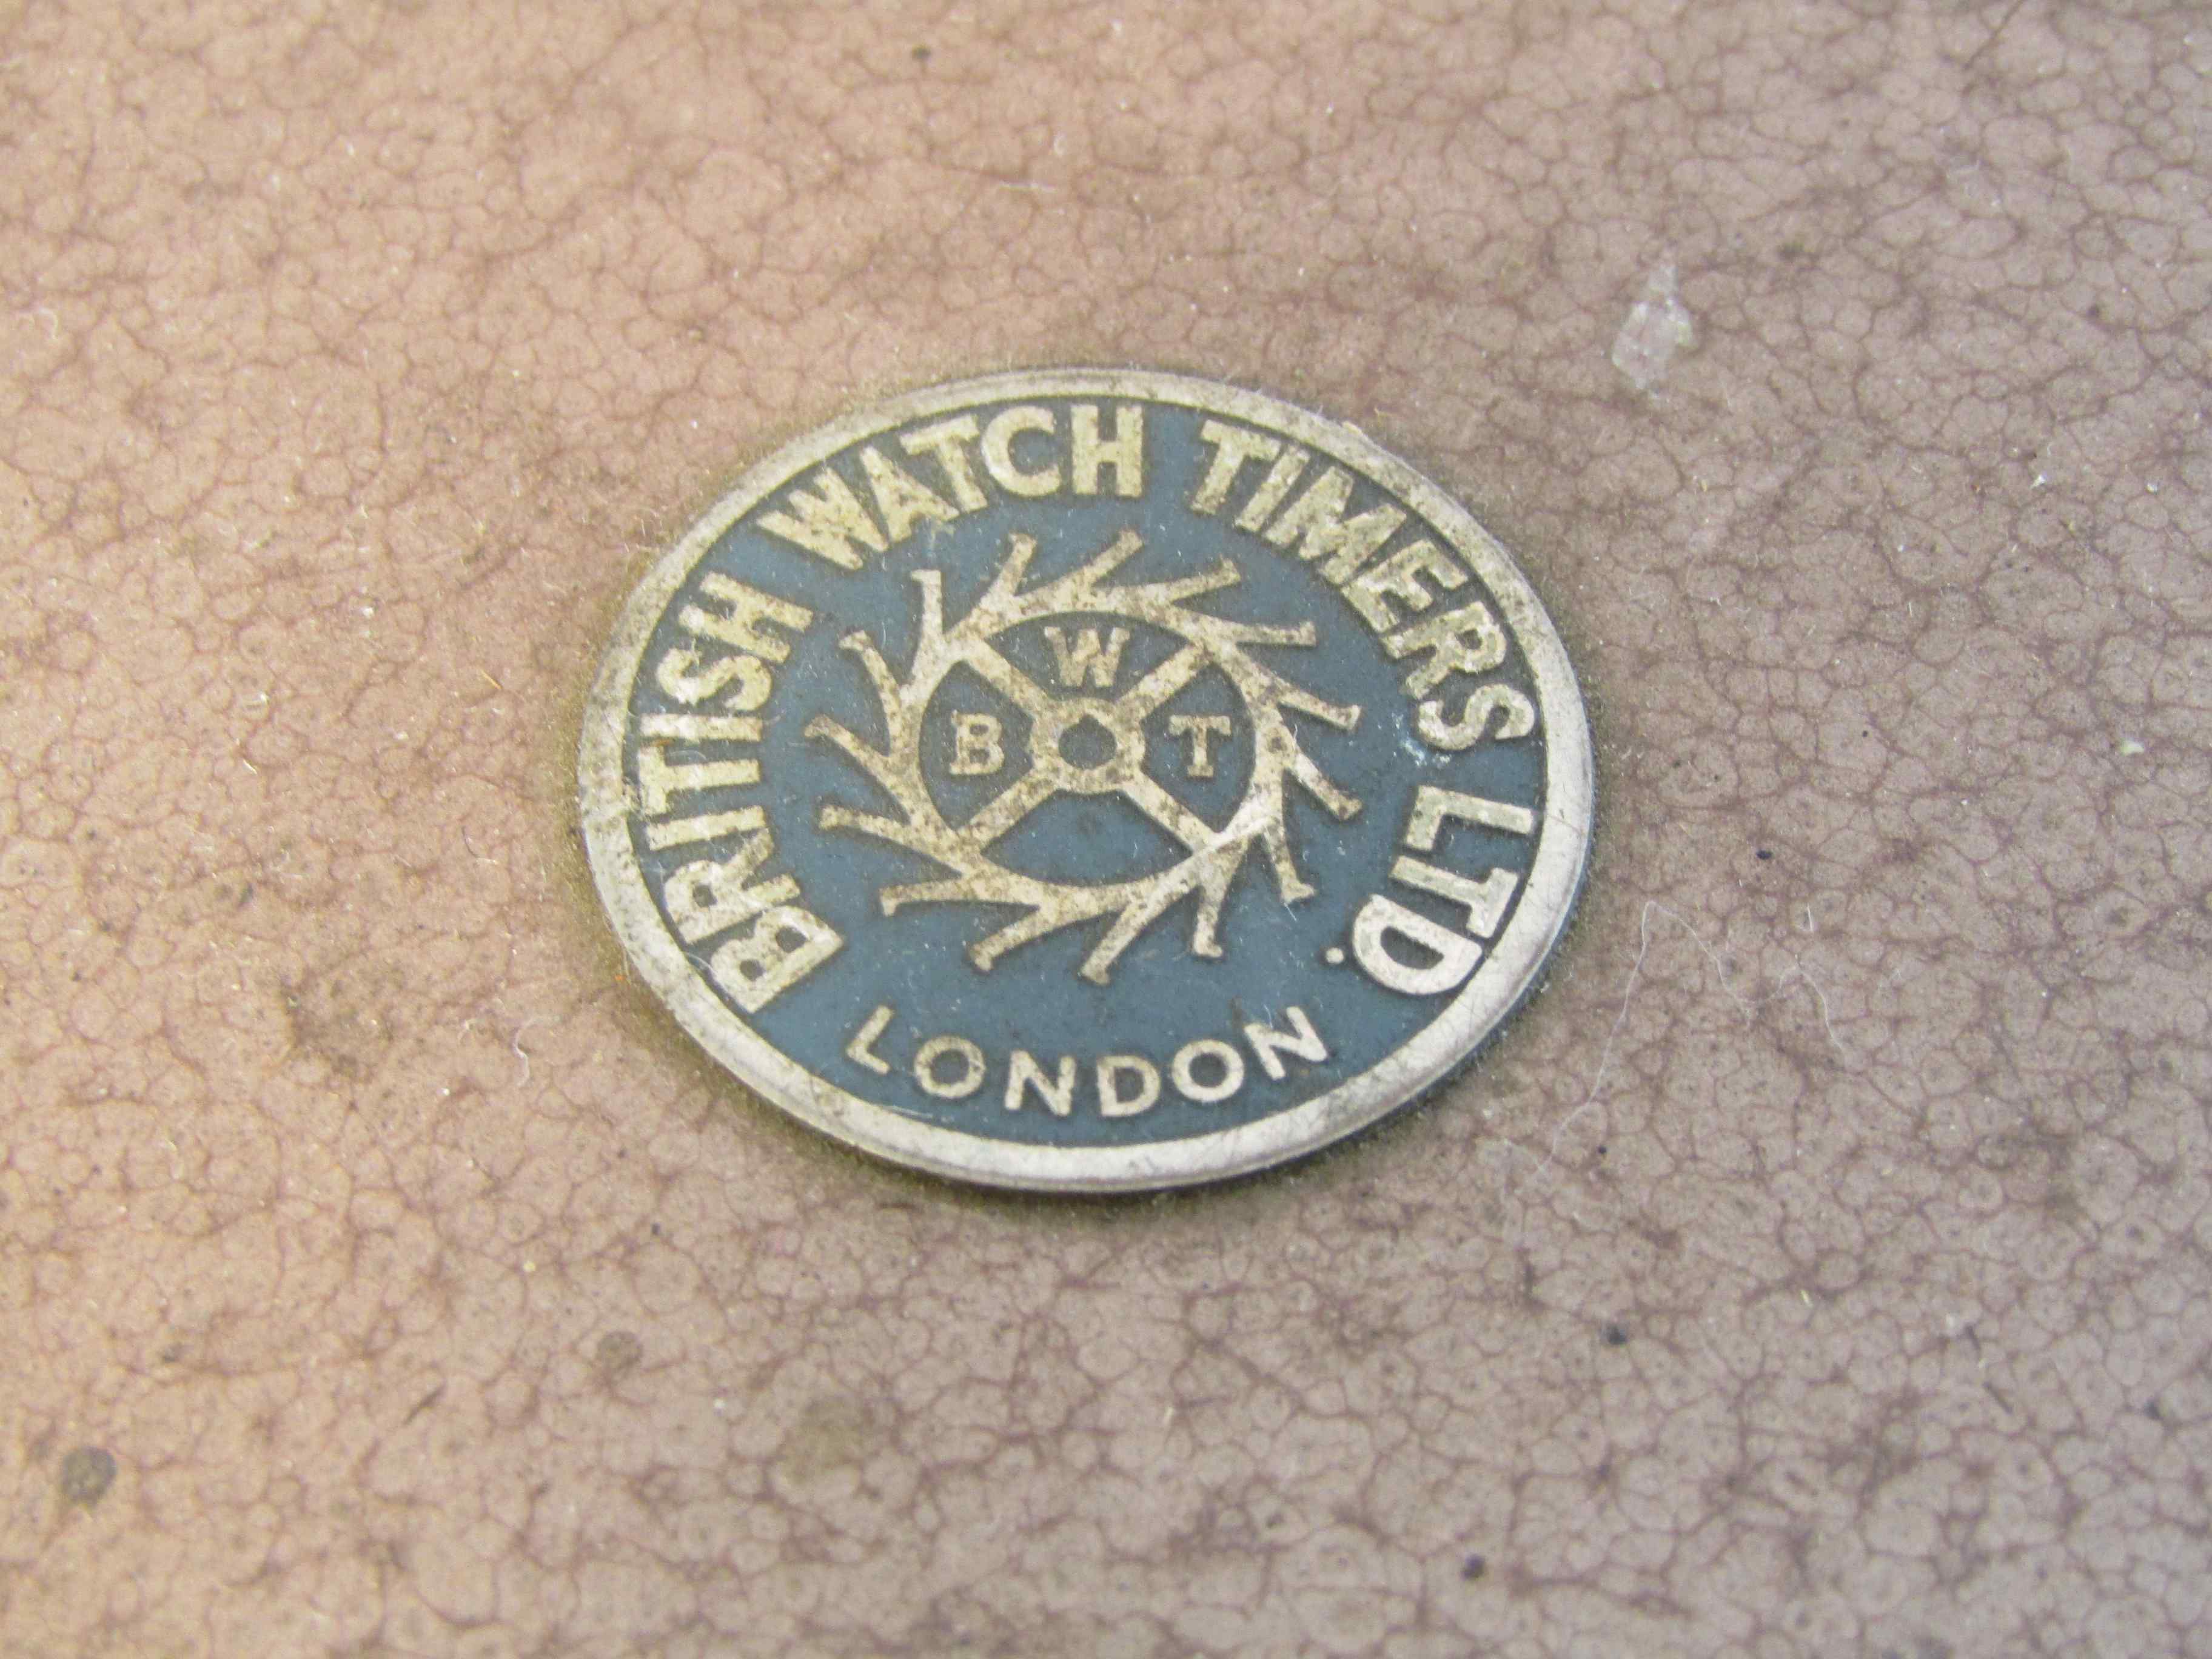 A British Watch Timers Ltd Regloscope Type W950, transducer connector type W935, - Image 3 of 4